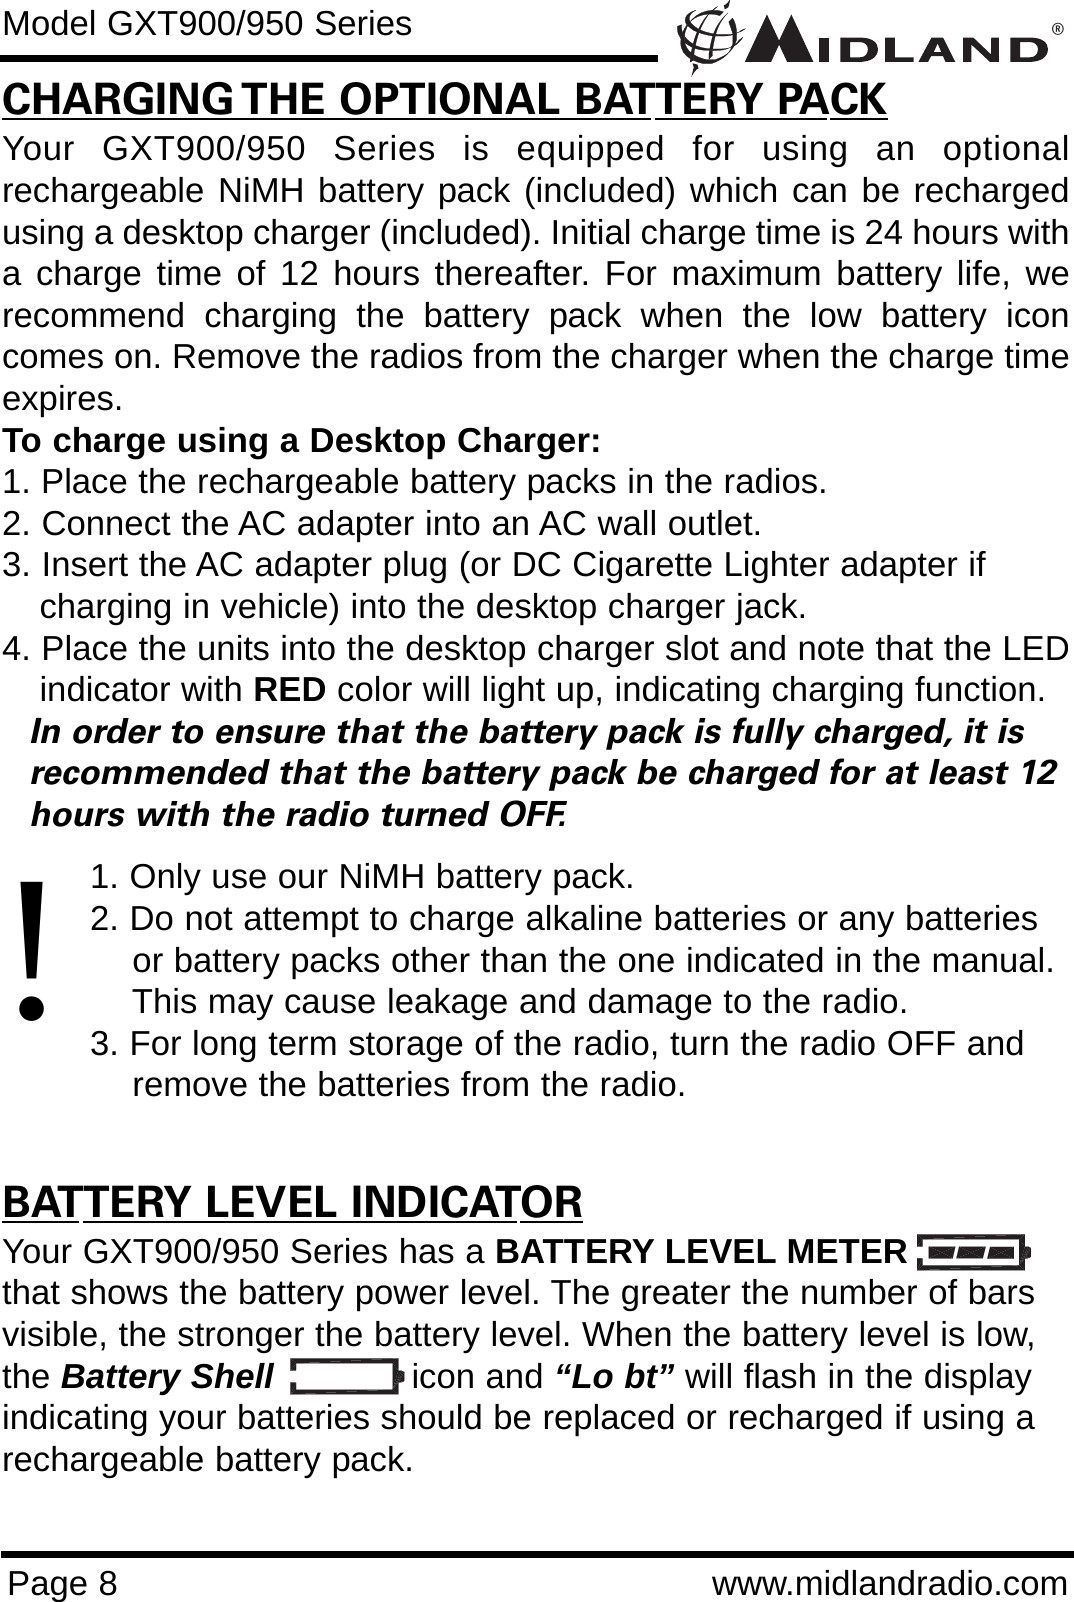 ®Page 8 www.midlandradio.comCHARGING THE OPTIONAL BATTERY PACKYour GXT900/950 Series is equipped for using an optionalrechargeable NiMH battery pack (included) which can be rechargedusing a desktop charger (included). Initial charge time is 24 hours witha charge time of 12 hours thereafter. For maximum battery life, werecommend charging the battery pack when the low battery iconcomes on. Remove the radios from the charger when the charge timeexpires.To charge using a Desktop Charger:1. Place the rechargeable battery packs in the radios.2. Connect the AC adapter into an AC wall outlet.3. Insert the AC adapter plug (or DC Cigarette Lighter adapter if    charging in vehicle) into the desktop charger jack.4. Place the units into the desktop charger slot and note that the LEDindicator with RED color will light up, indicating charging function. In order to ensure that the battery pack is fully charged, it is  recommended that the battery pack be charged for at least 12 hours with the radio turned OFF.1. Only use our NiMH battery pack.2. Do not attempt to charge alkaline batteries or any batteries or battery packs other than the one indicated in the manual. This may cause leakage and damage to the radio.3. For long term storage of the radio, turn the radio OFF and remove the batteries from the radio.BATTERY LEVEL INDICATORYour GXT900/950 Series has a BATTERY LEVEL METERthat shows the battery power level. The greater the number of barsvisible, the stronger the battery level. When the battery level is low,the Battery Shell icon and “Lo bt” will flash in the displayindicating your batteries should be replaced or recharged if using arechargeable battery pack.Model GXT900/950 Series!